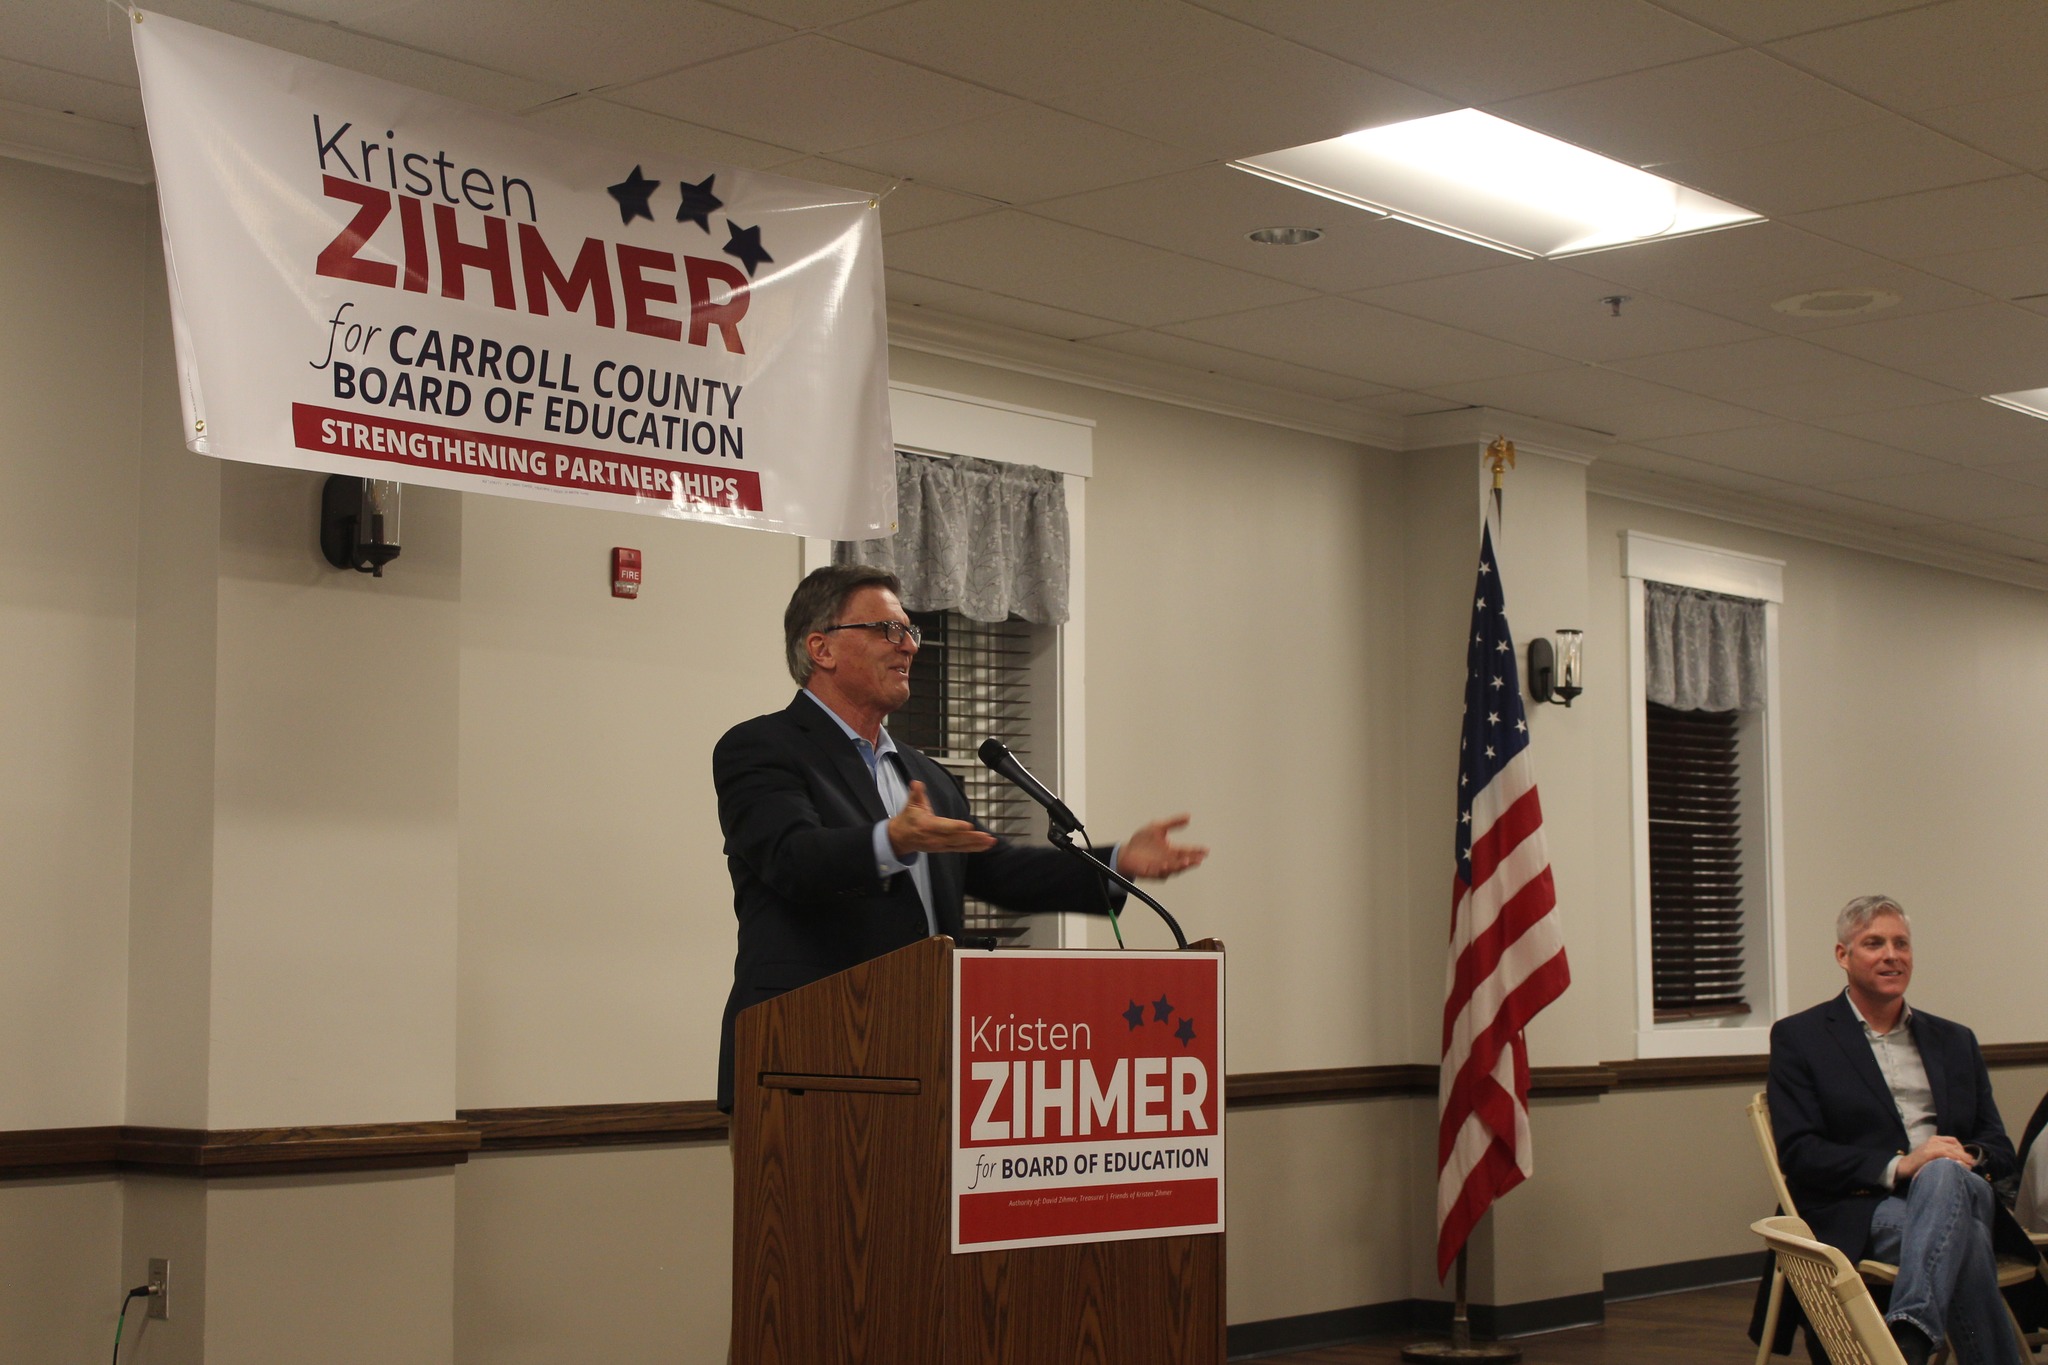 Former Governor Bob Ehrlich Endorses Zihmer and Malveaux in High-Stakes Carroll County BOE Race